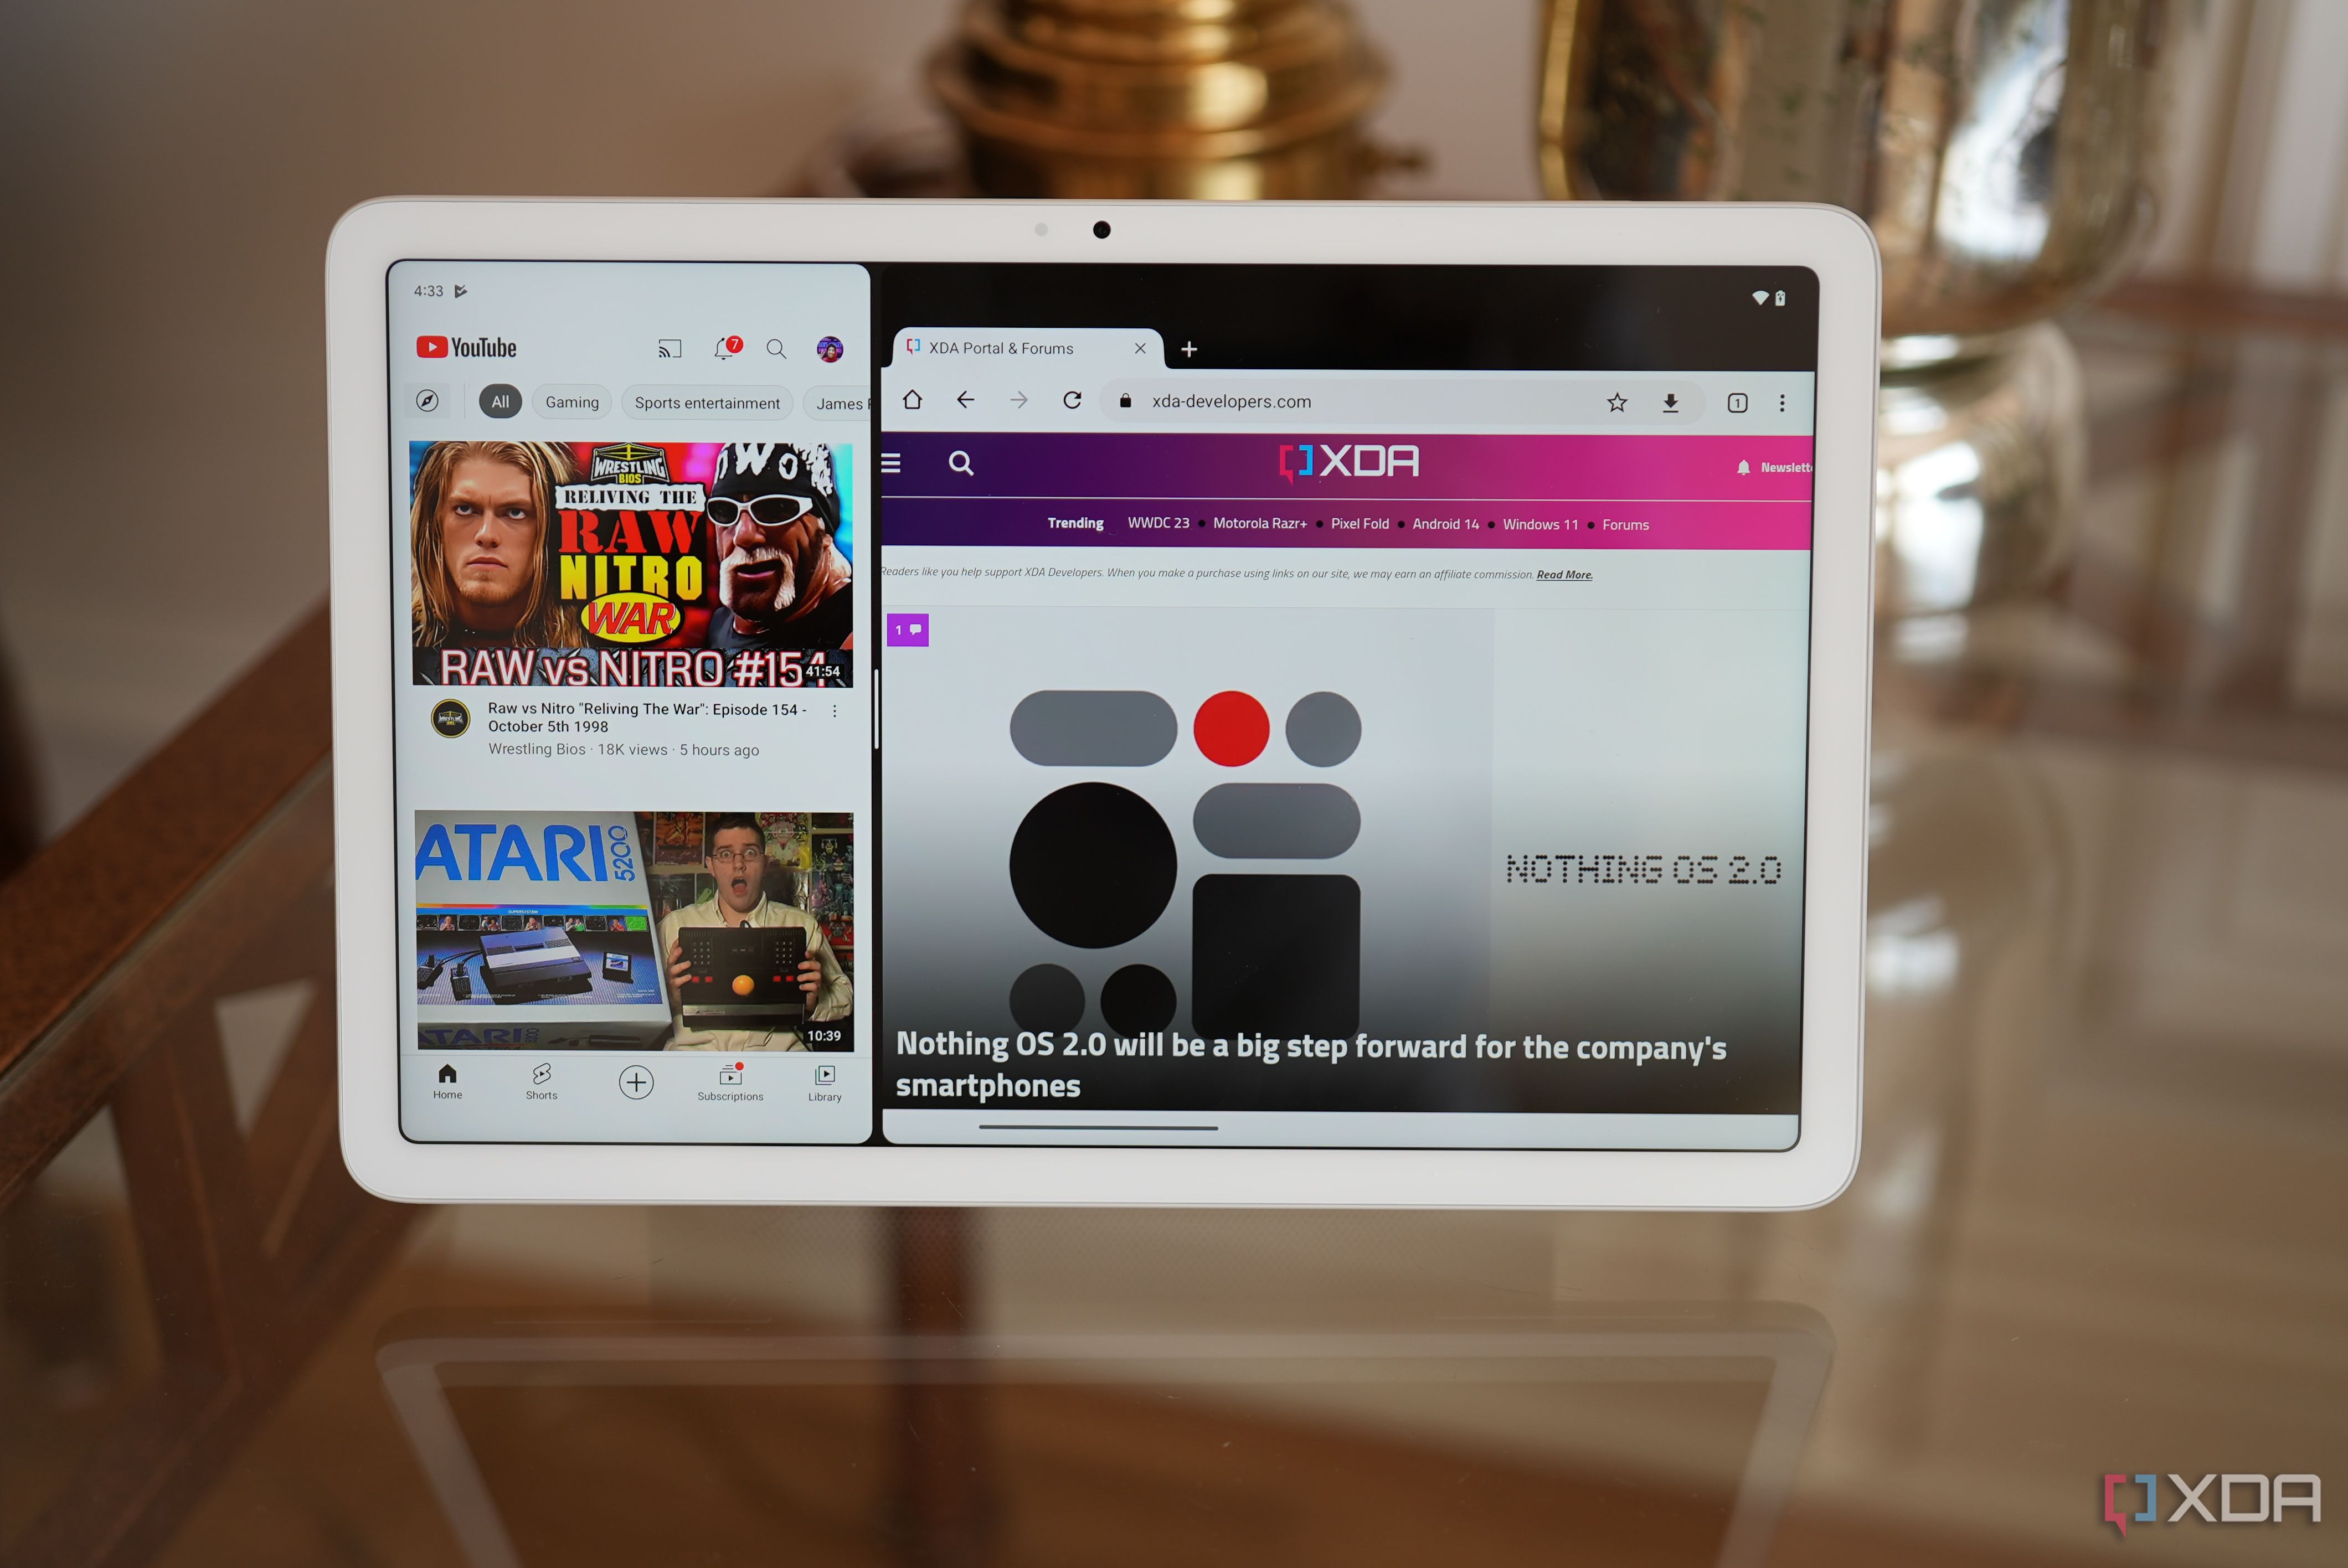 Google Pixel Tablet review: The best Android tablet experience ever